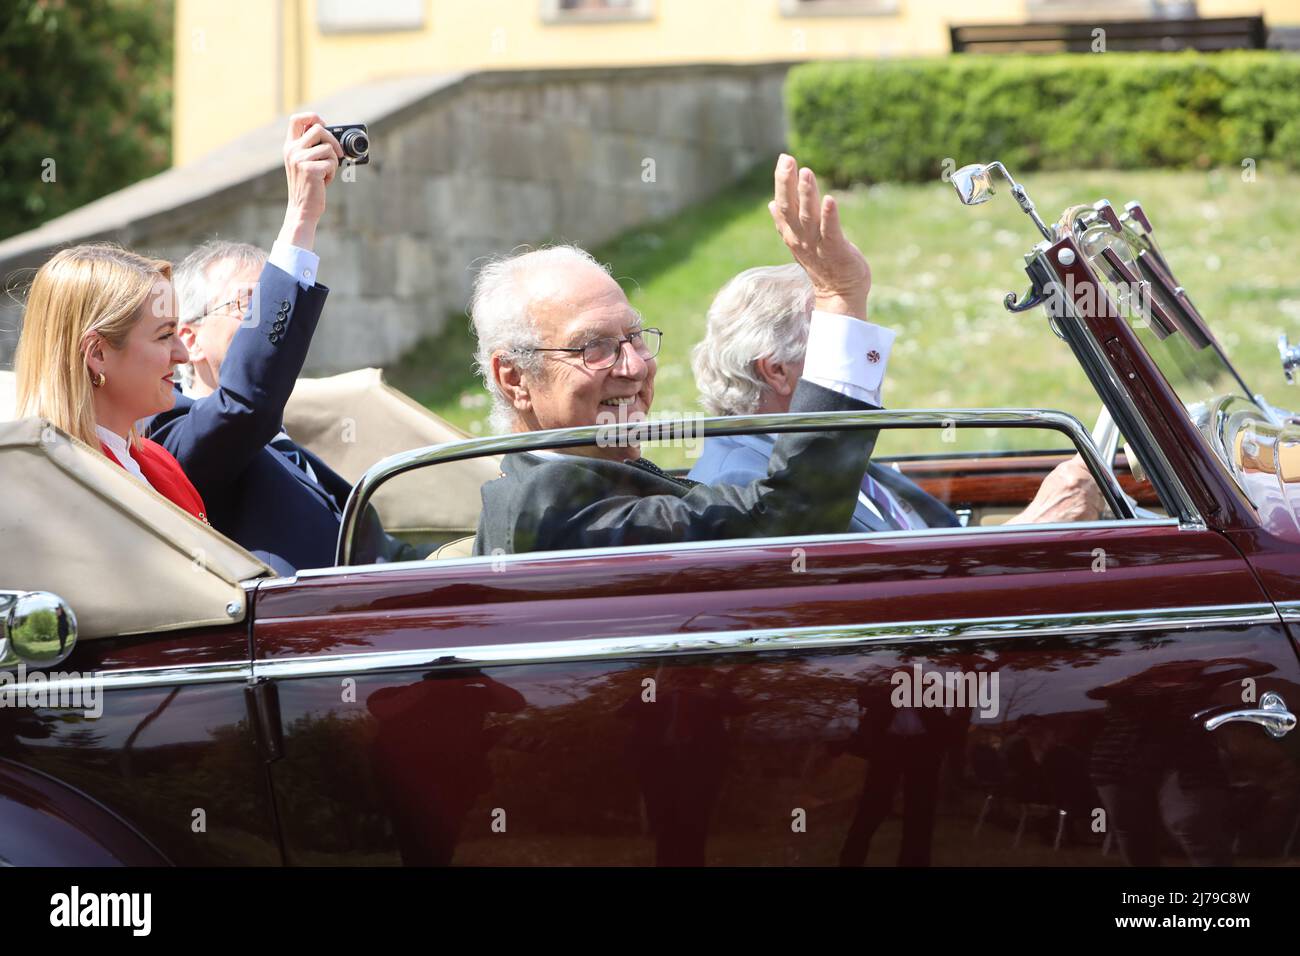 07 May 2022, Saxony-Anhalt, Ballenstedt: Eduard Prince von Anhalt waves from a vehicle. He is celebrating his 80th birthday in Ballenstedt. At the same time the investiture took place. In the context of the Investitur, persons are honored annually for special achievements by the Askan House Order "Albrecht the Bear". The investiture takes place in the presence of Eduard Prince of Anhalt. Photo: Matthias Bein/dpa-Zentralbild/ZB Stock Photo